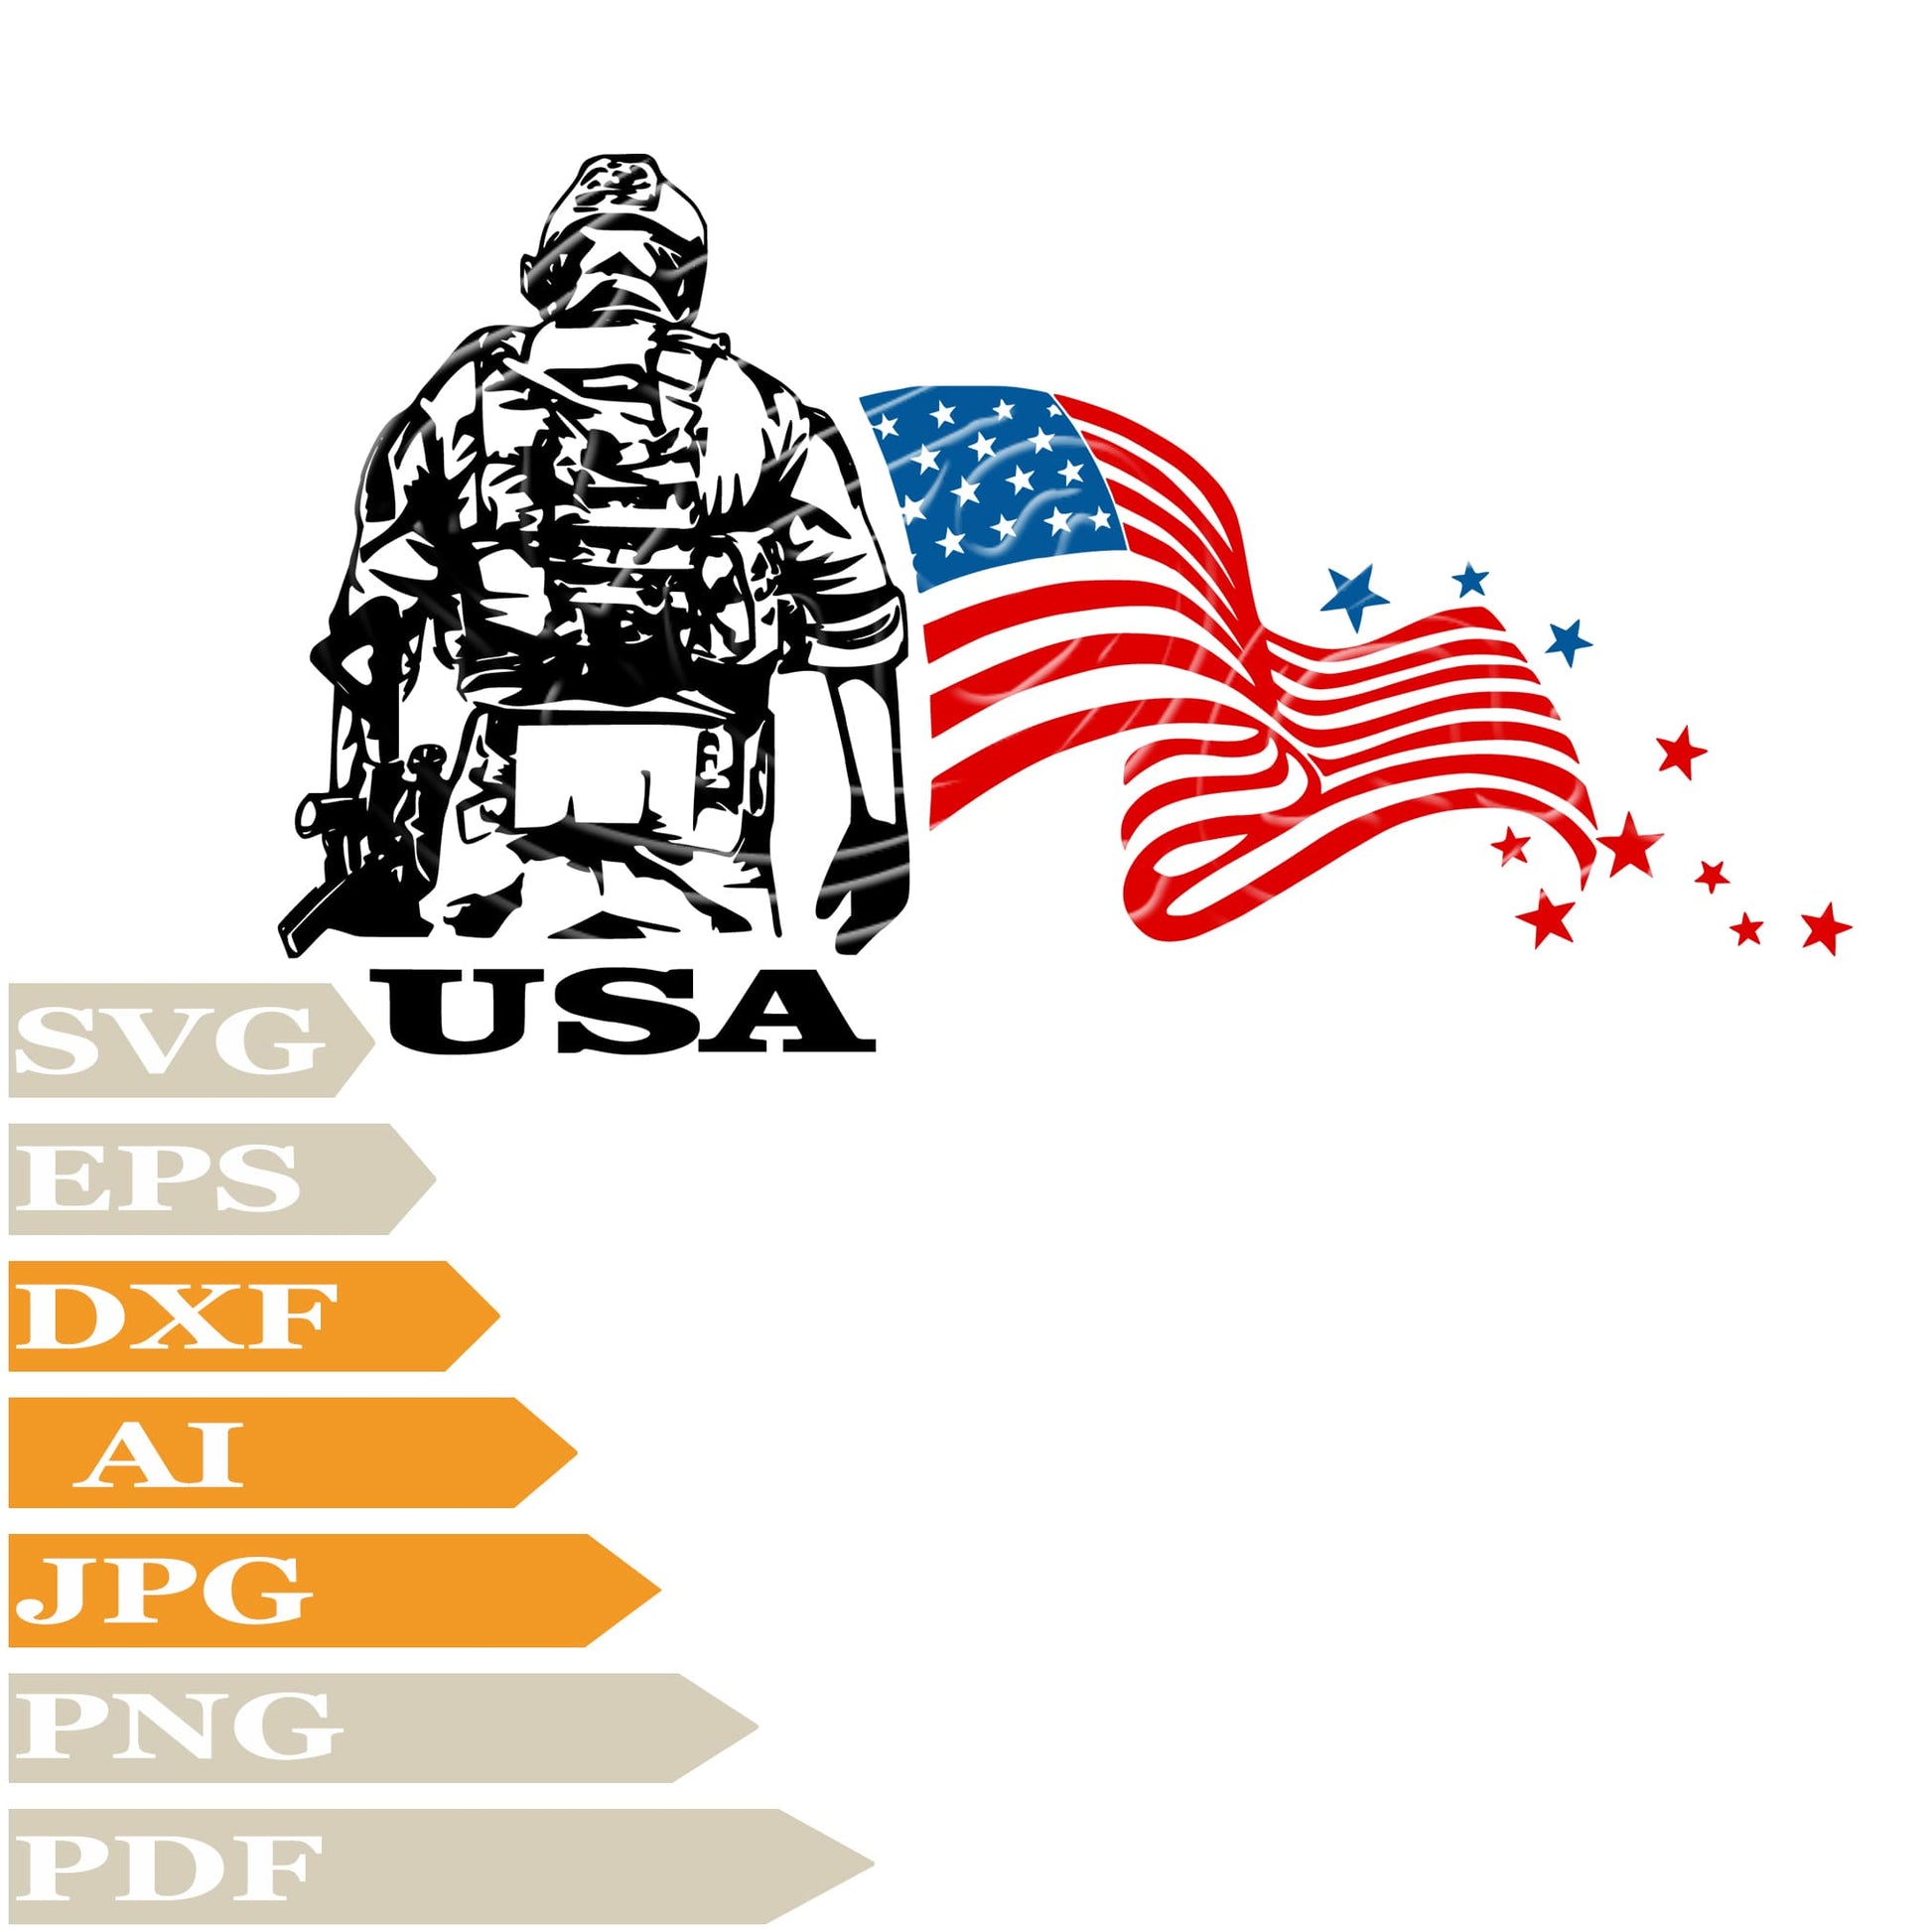 Soldier, American Soldier Svg File, Image Cut, Png, For Tattoo, Silhouette, Digital Vector Download, Cut File, Clipart, For Cricut